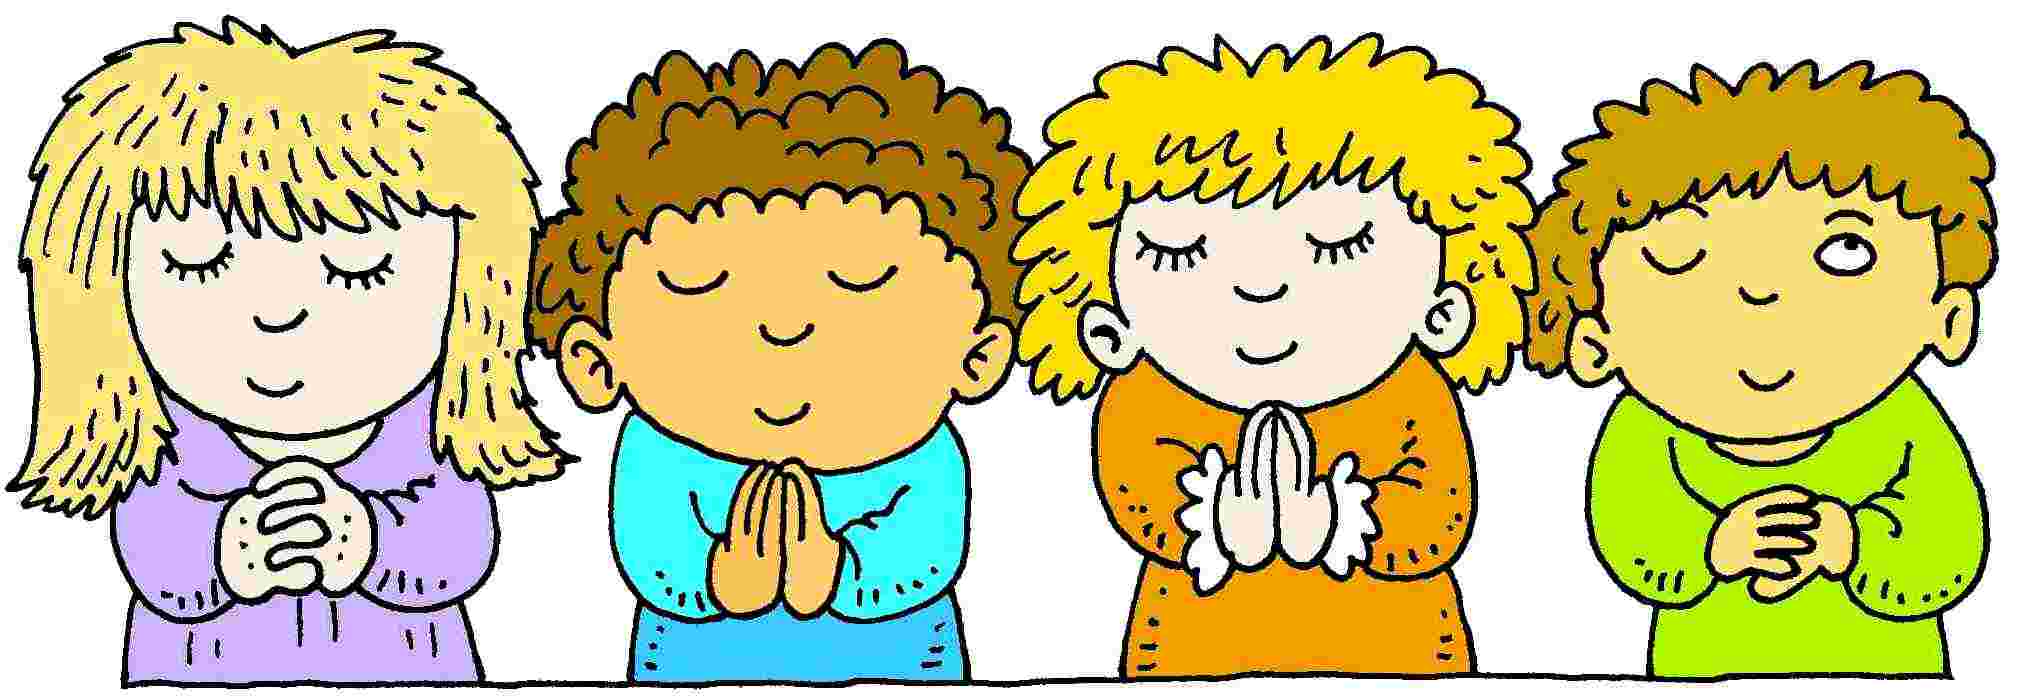 Boy and girl praying clipart